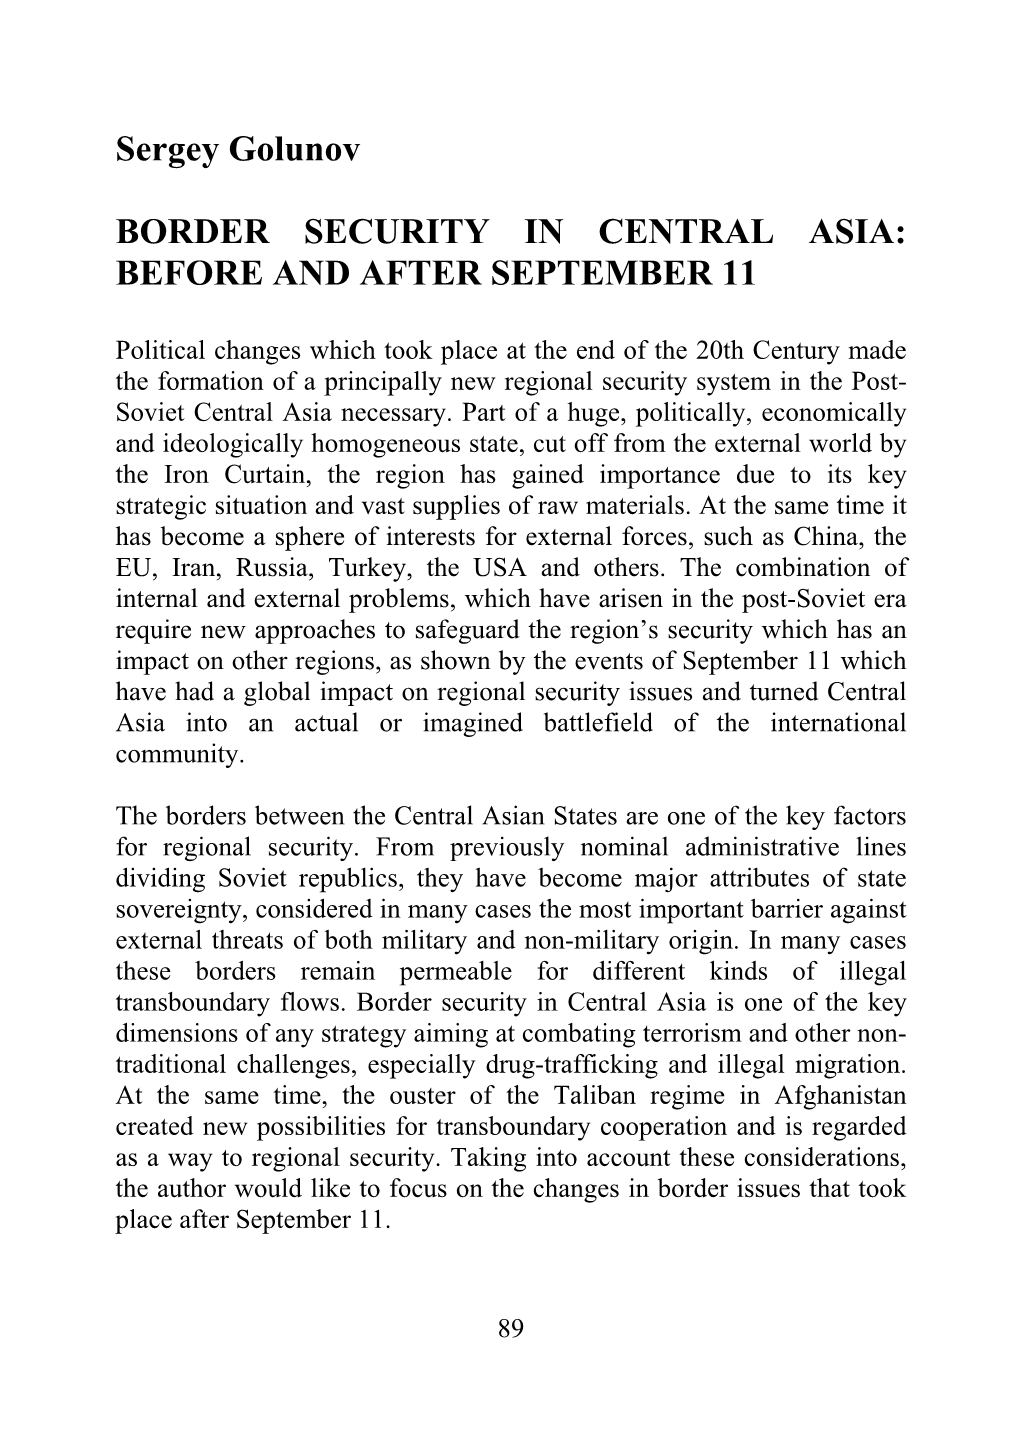 Border Security in Central Asia: Before and After September 11